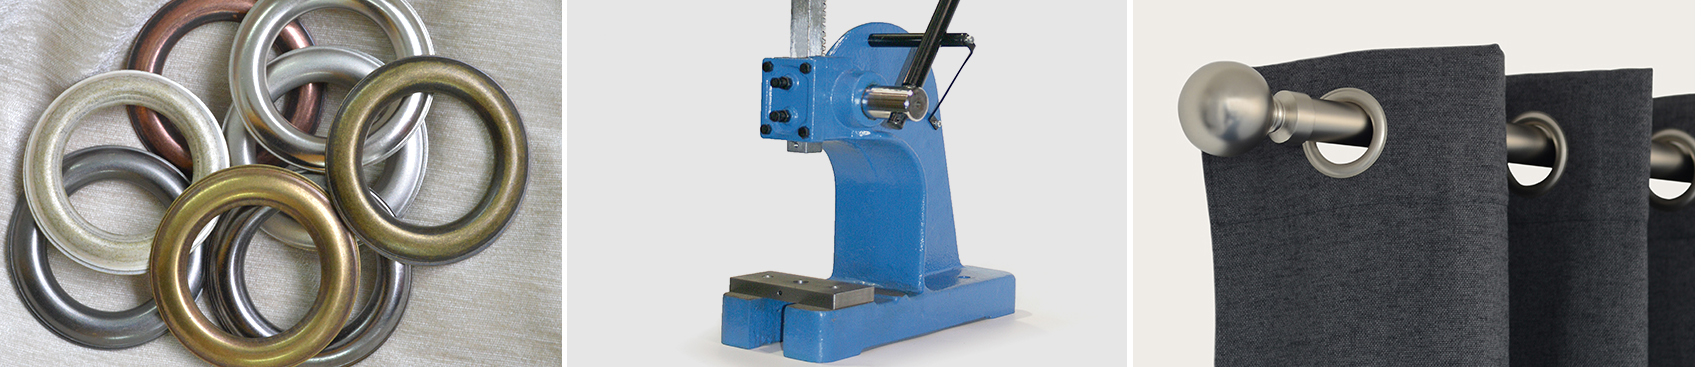 Eyelet Press & Tools - Stainless Steel - Up to 40mm - Up to 56mm - Up to 19mm